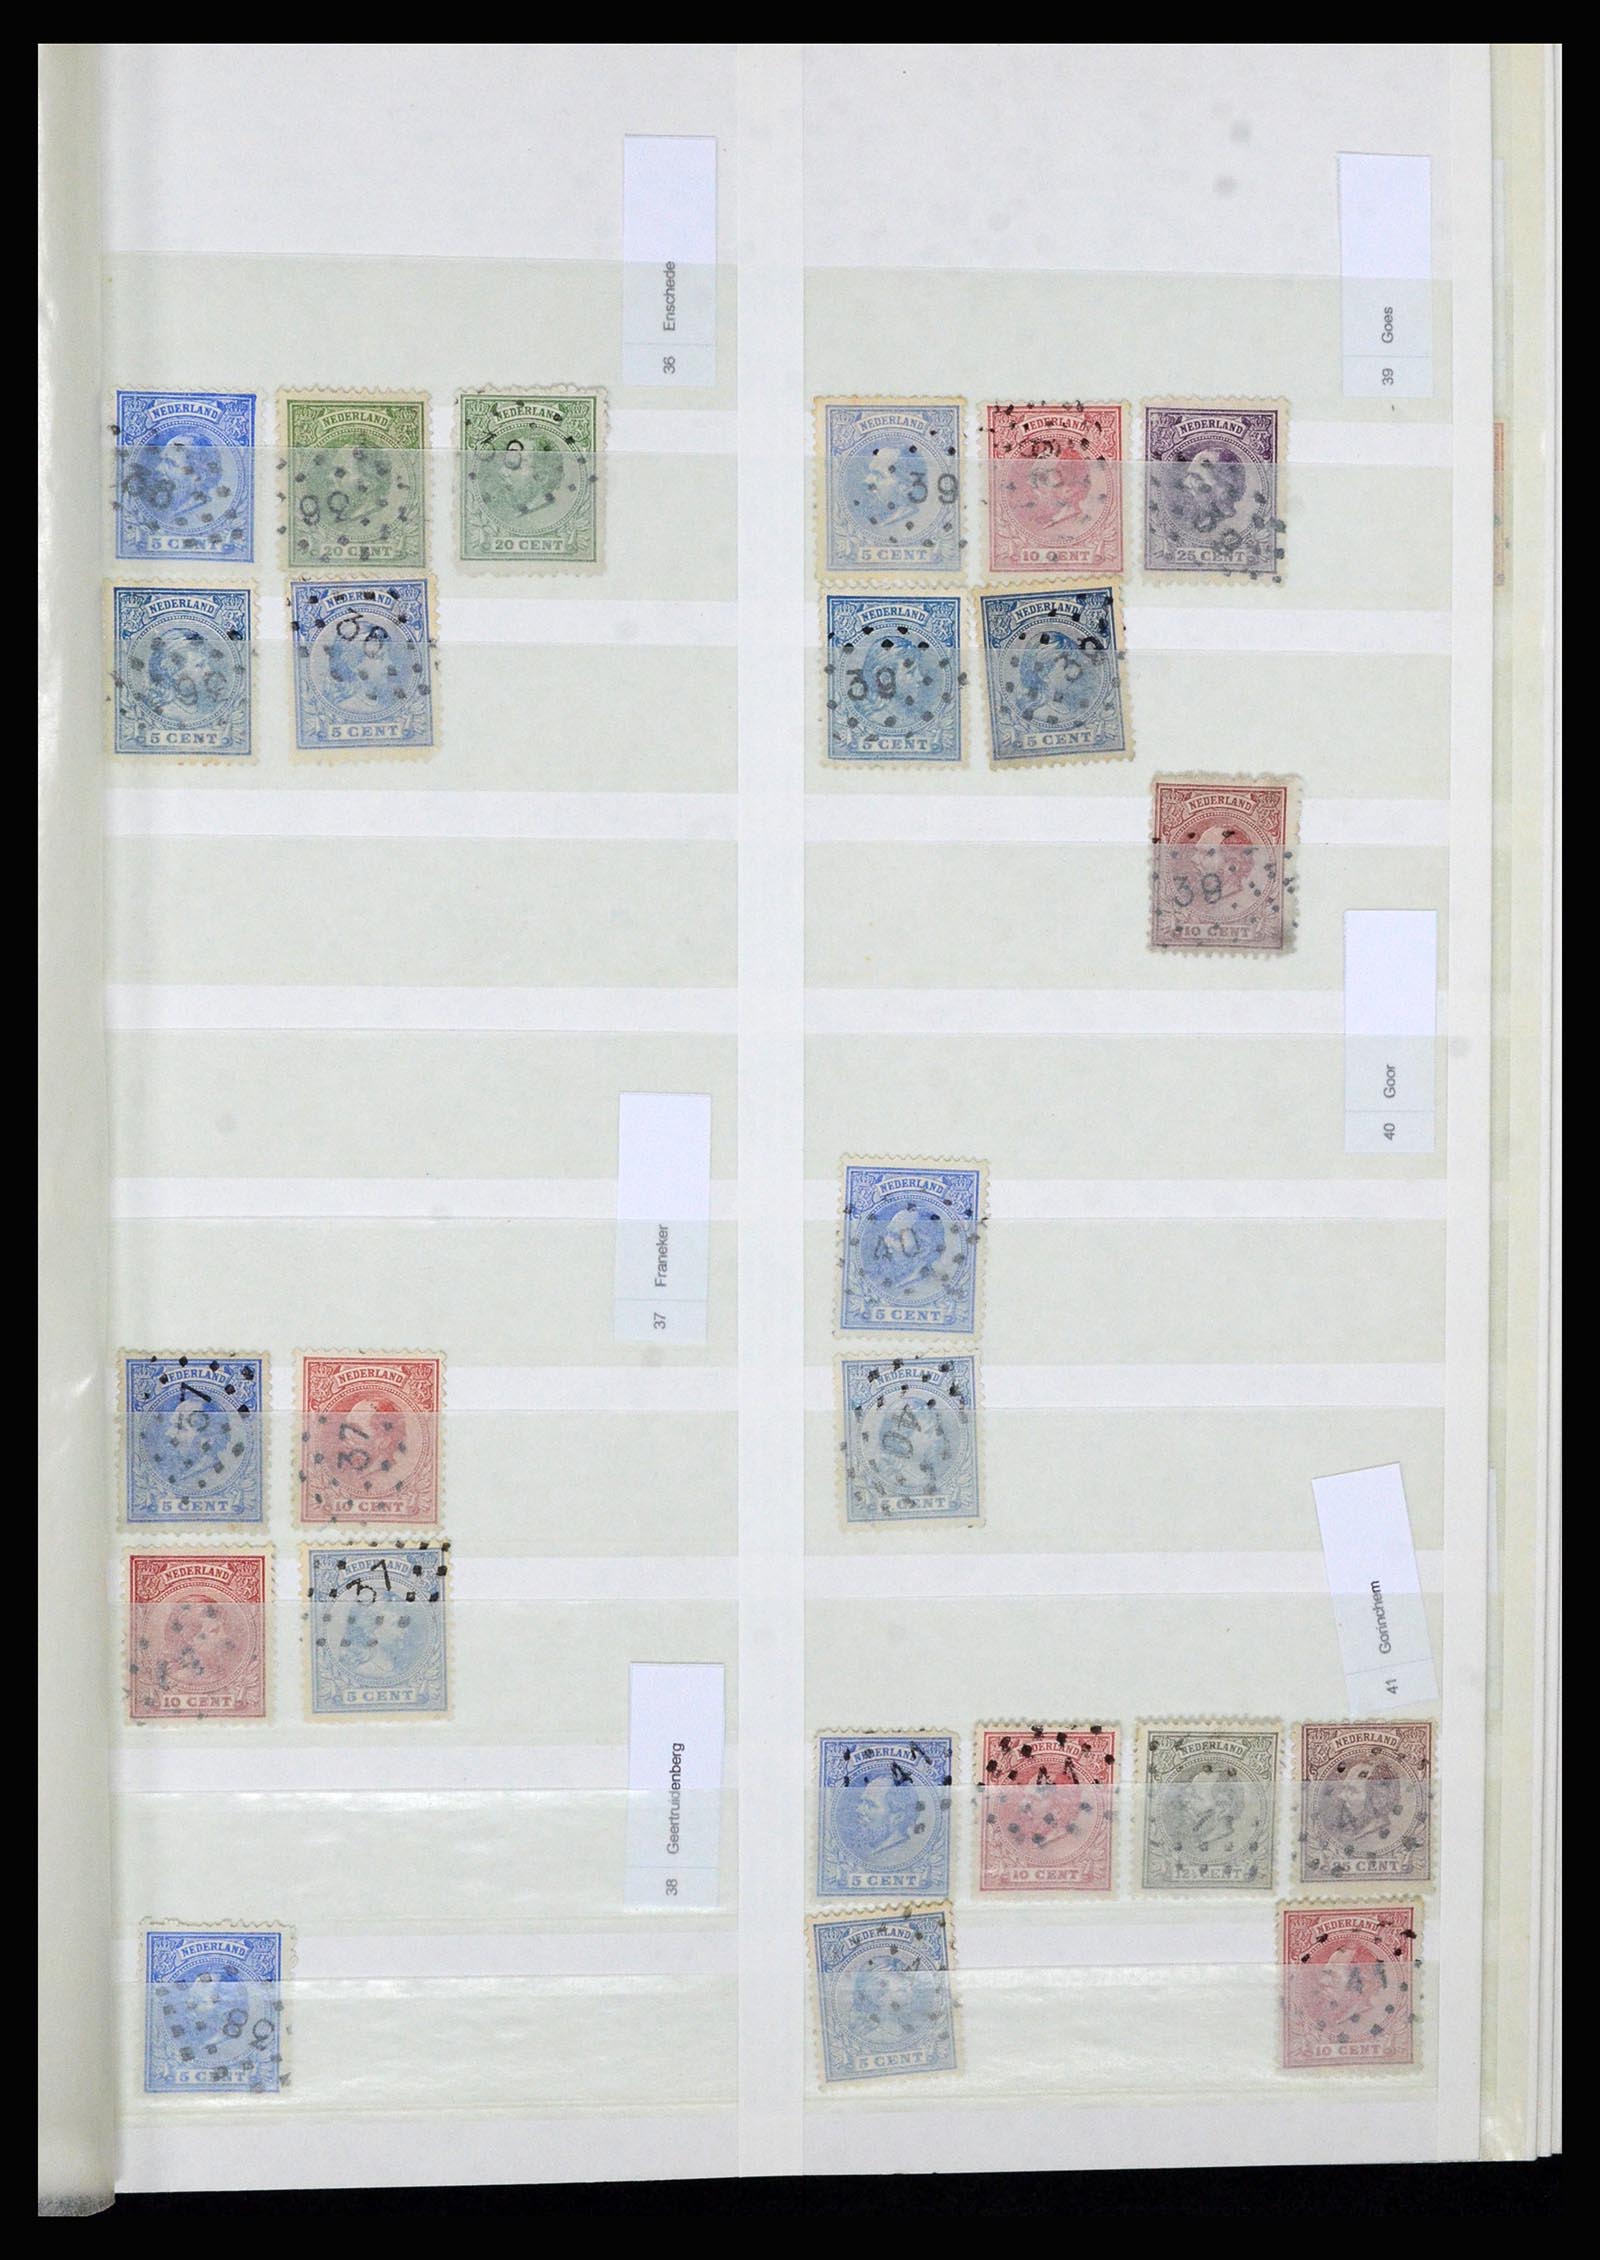 36739 009 - Stamp collection 36739 Netherlands numeral cancels.